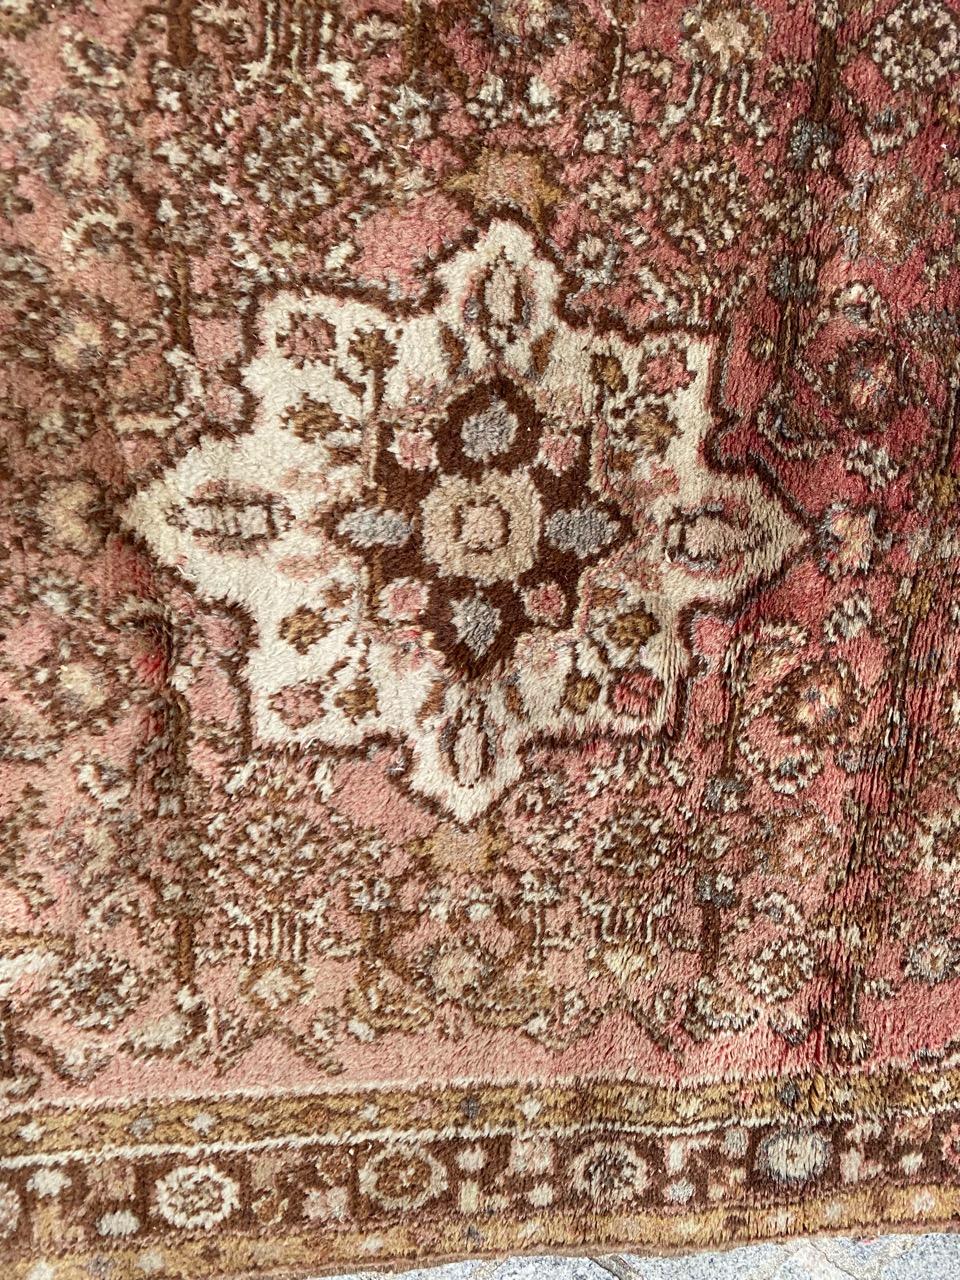 Nice antique Hamadan rug with a Decorative design and nice colors, entirely hand knotted with wool velvet on cotton foundation.

✨✨✨
